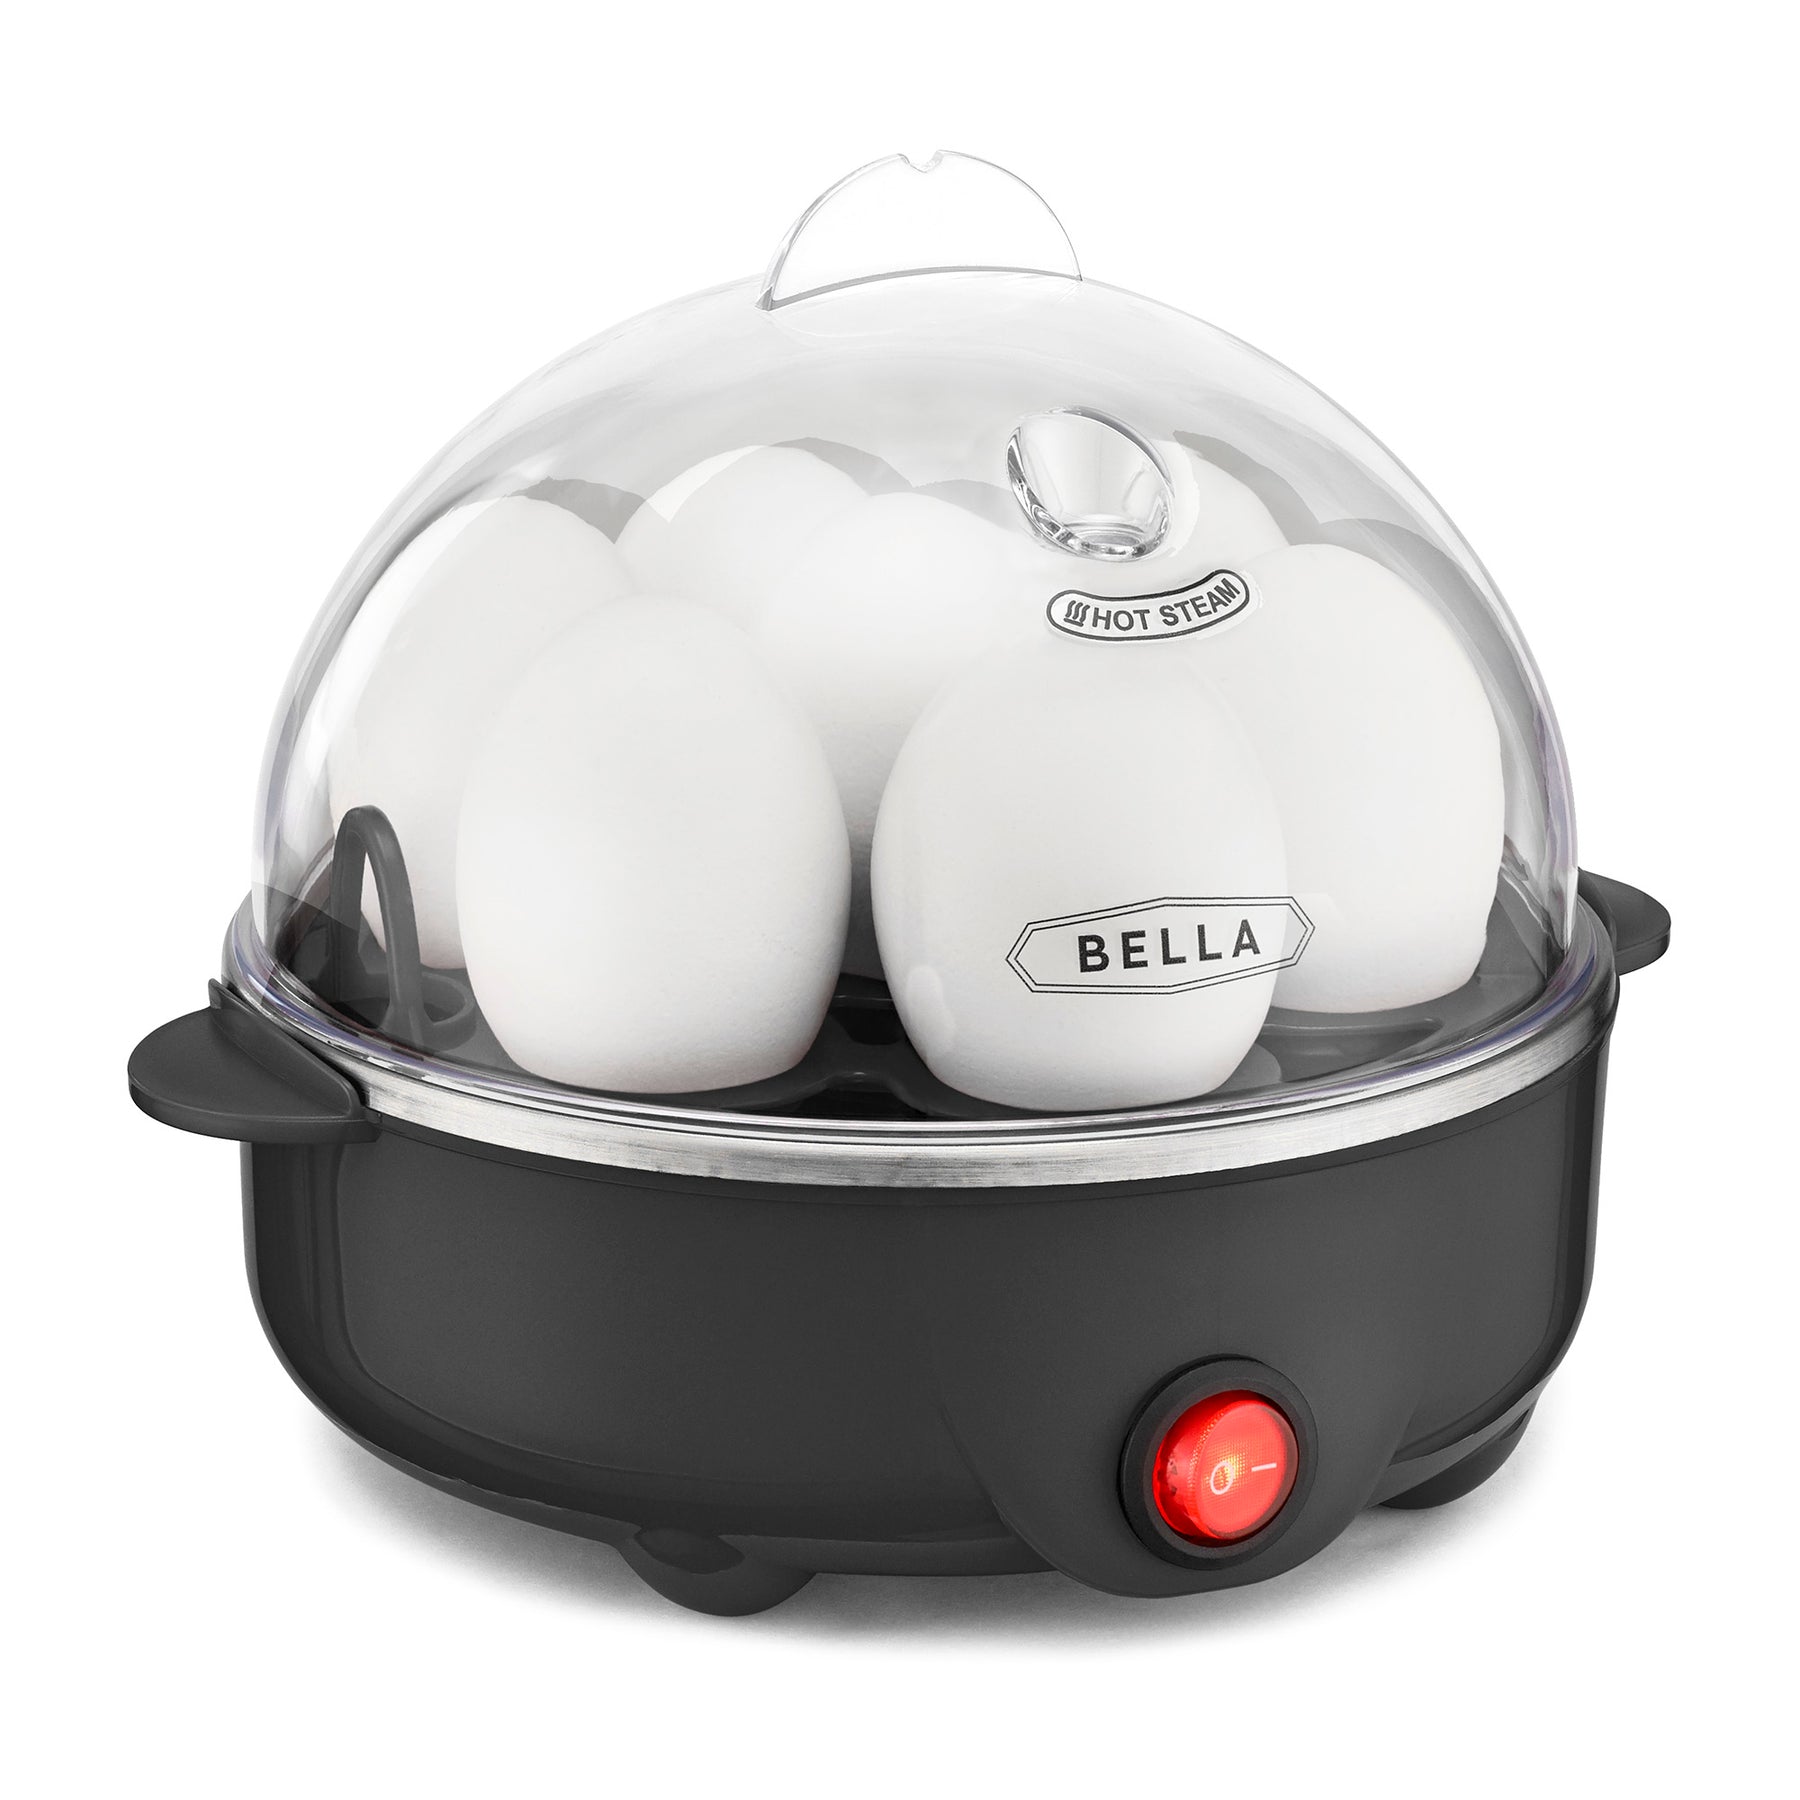 DASH Rapid Egg Cooker: 6 Egg Capacity Electric Egg Cooker for Hard Boiled  Eggs, Poached Eggs, Scrambled Eggs, or Omelets with Auto Shut Off Feature 